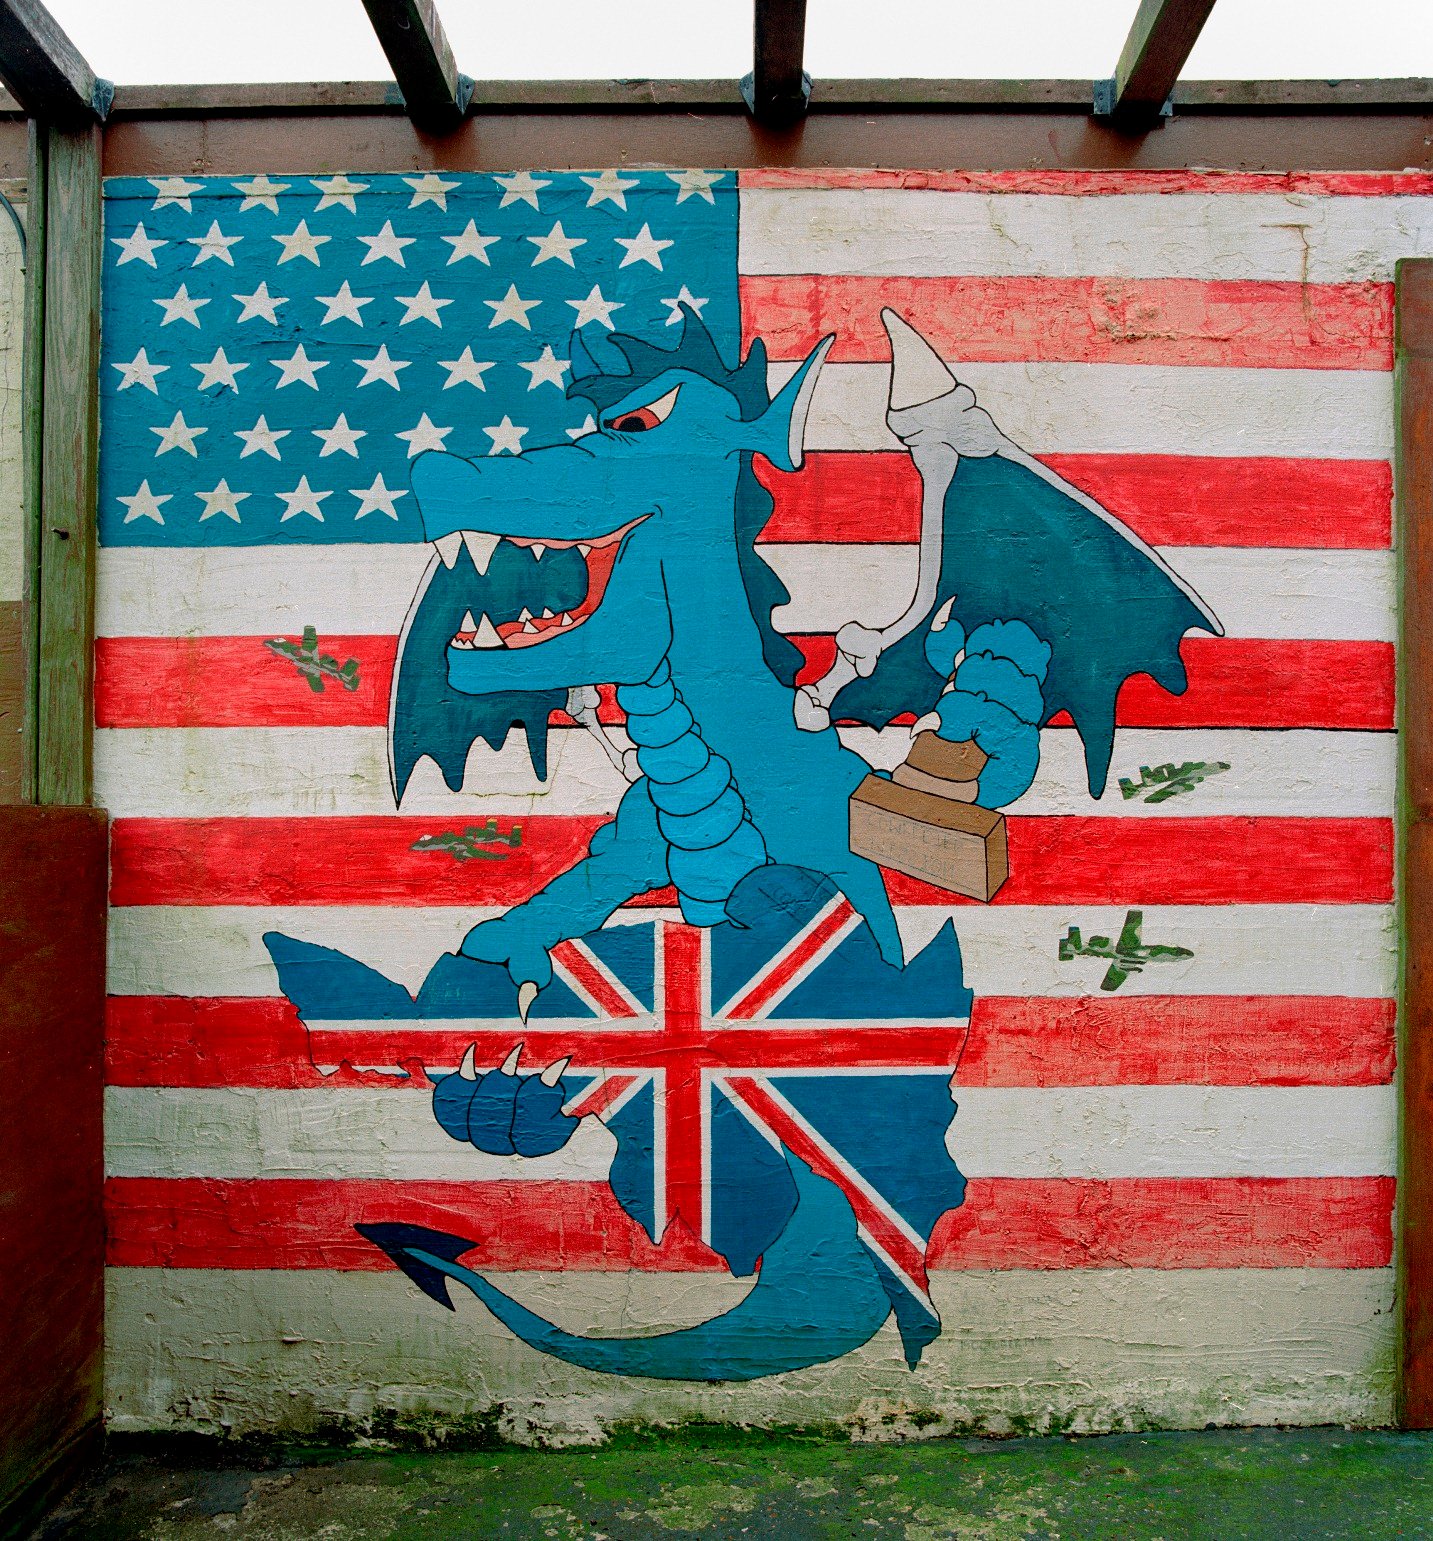 RAF Bentwaters, Suffolk, a mural showing a dragon clasping the United Kingdom with A-10 Thunderbolt aircraft buzzing around against the background of the stars and stripes.